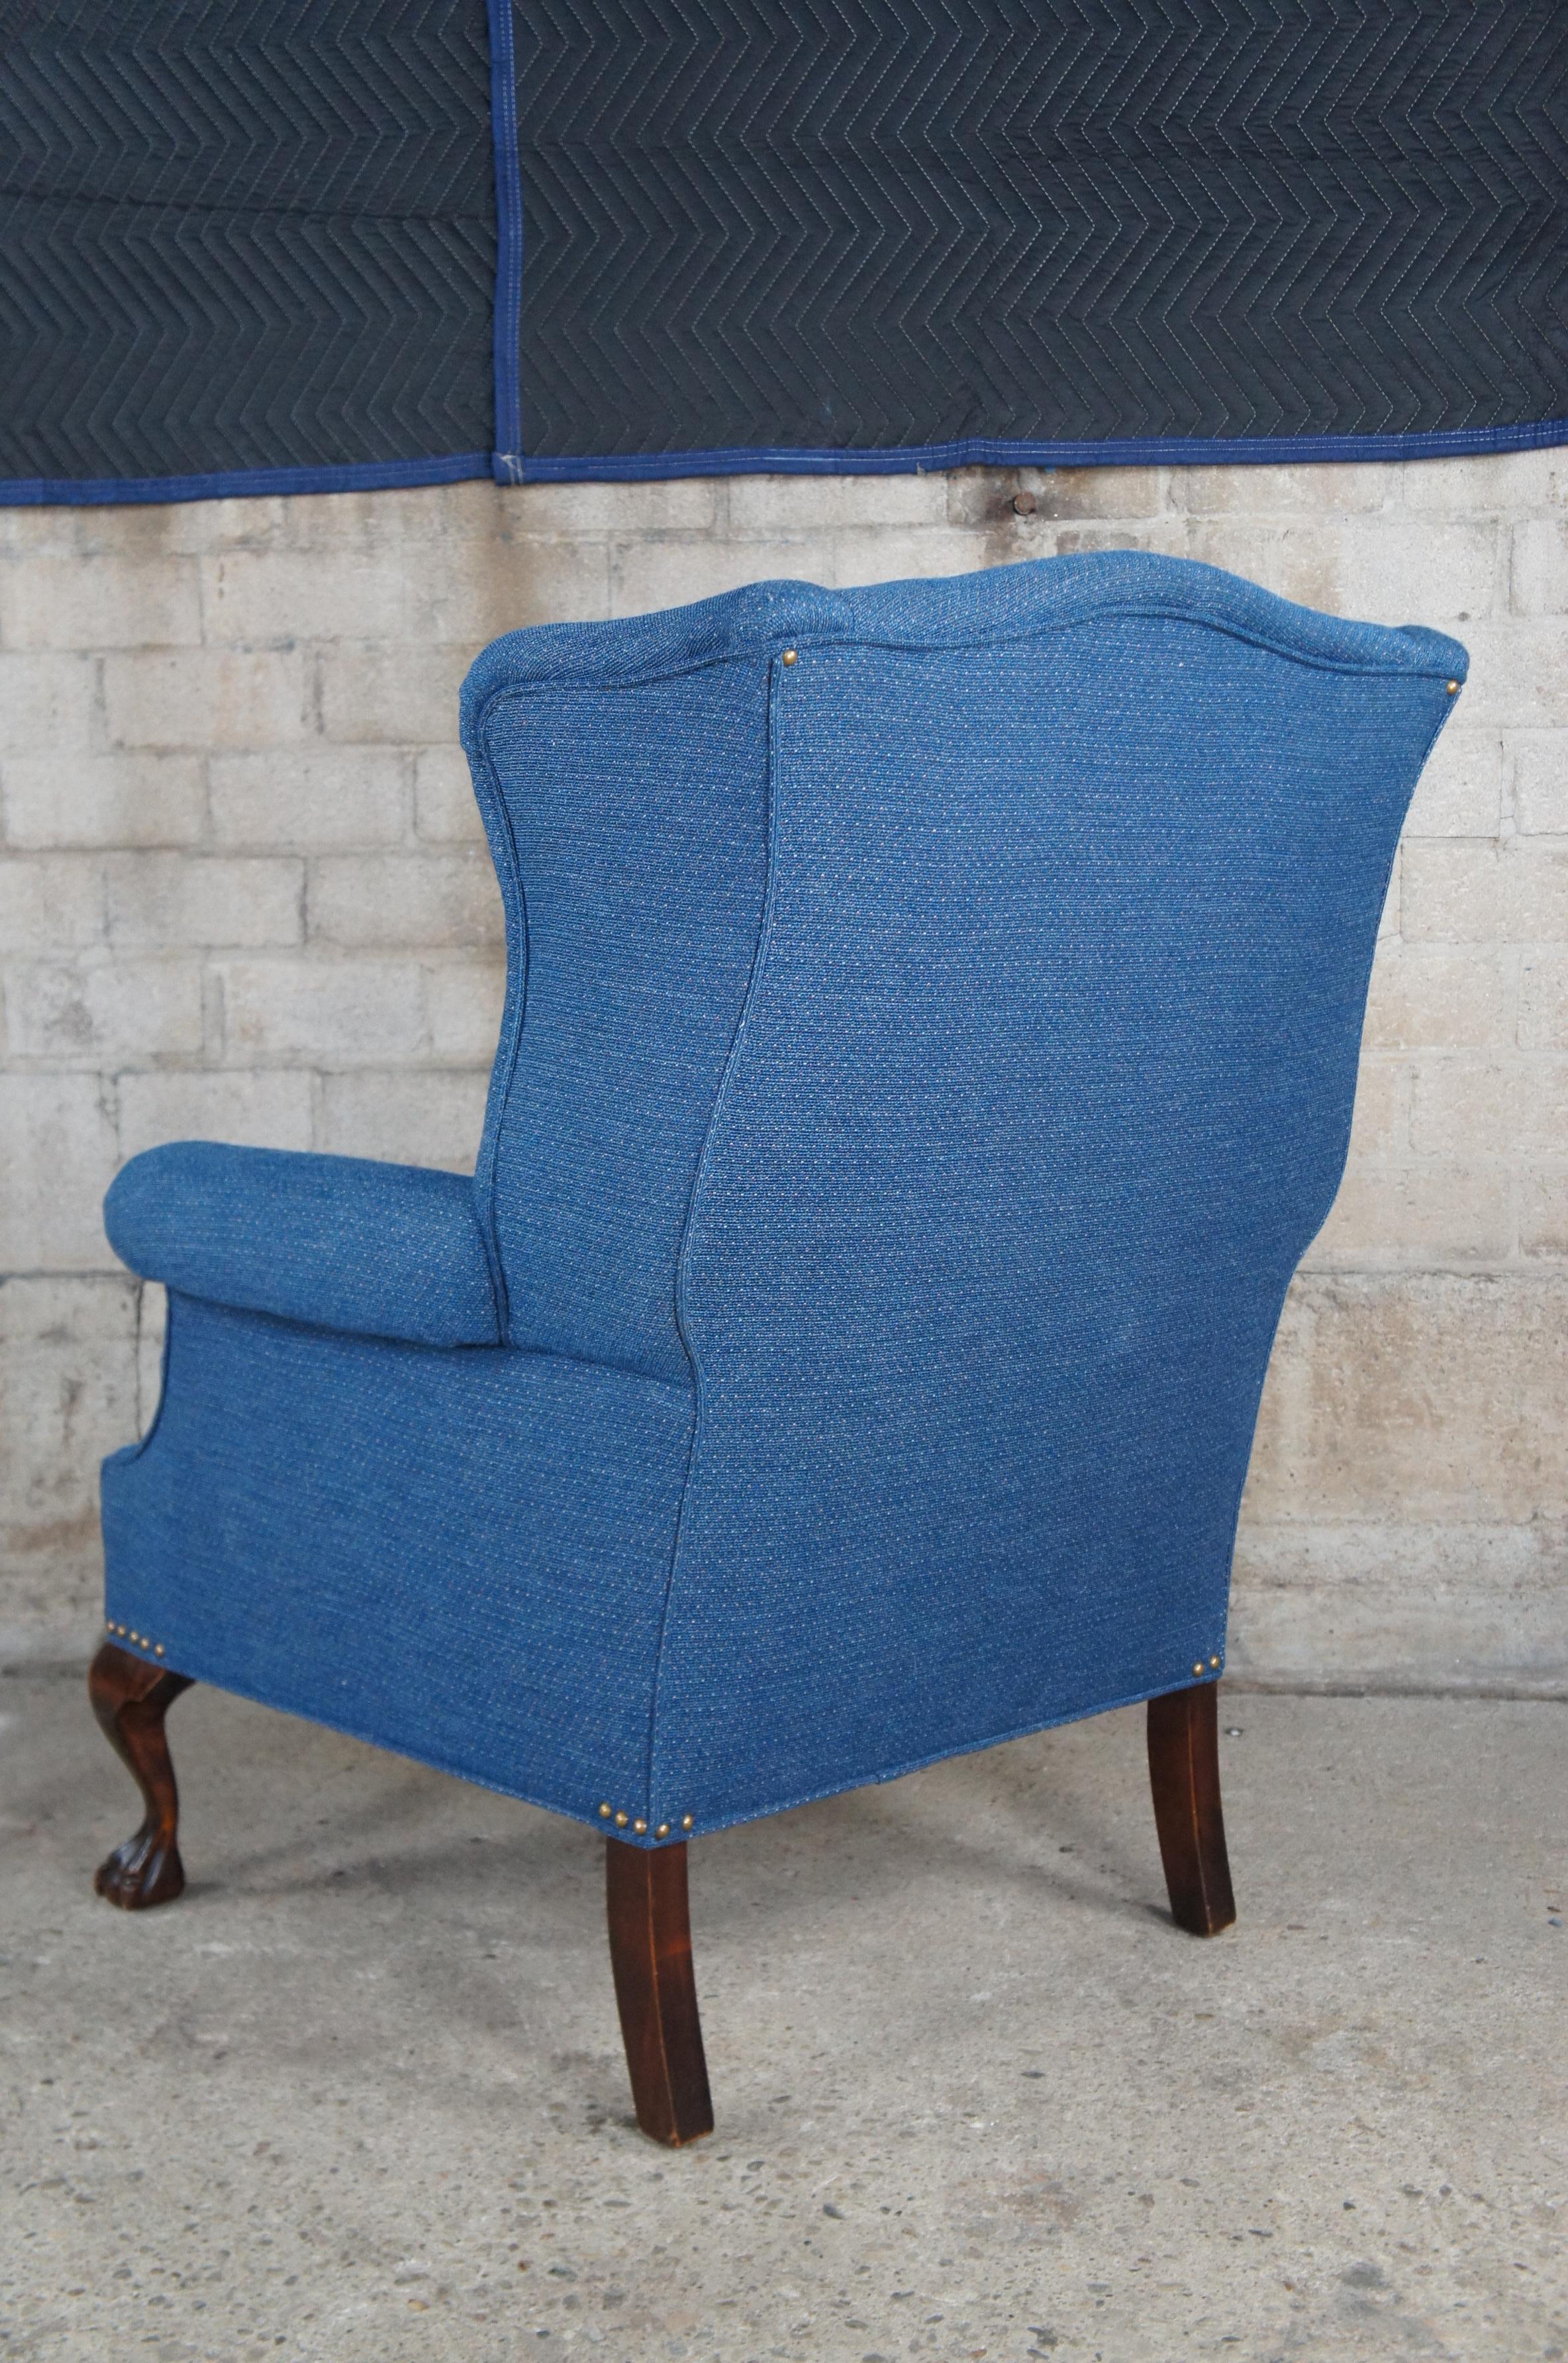 Upholstery Vintage Chippendale Style Blue Upholstered Mahogany Wingback Library Arm Chair